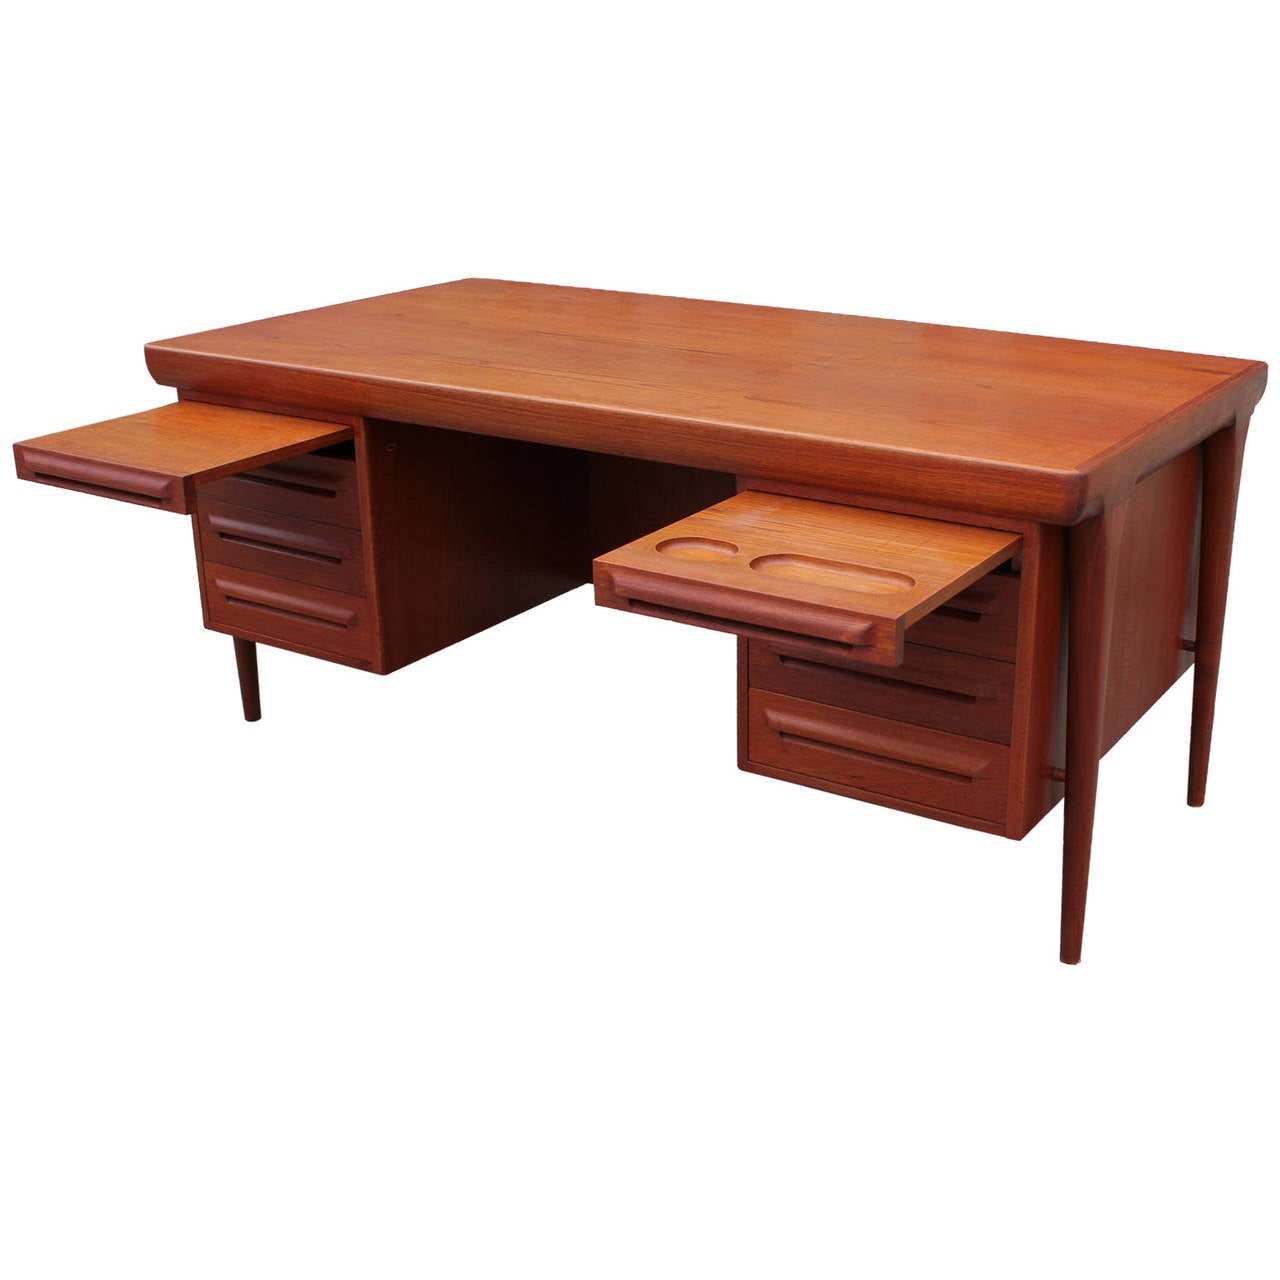 Beautiful Teak executive desk with two sets of drawers and cabinets on the back. Made in denmark circa 1960. Designer Unknown.